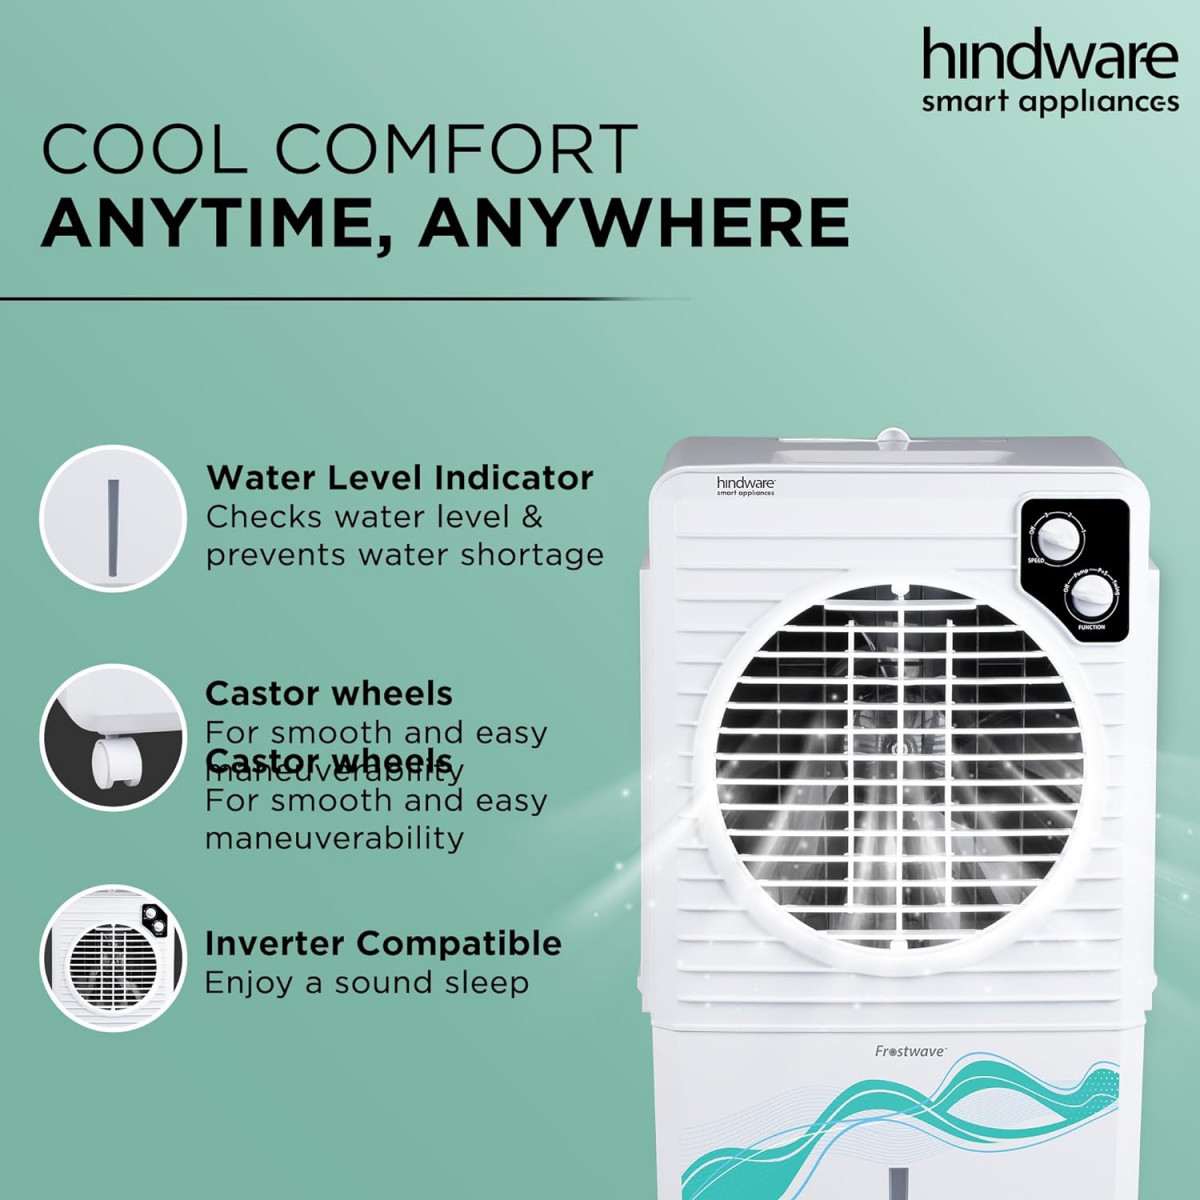 Hindware Smart Appliances Frostwave 38L Personal Air cooler  Fan Based  12 Inc Fan Blade and Ice Chamber  White  Grey